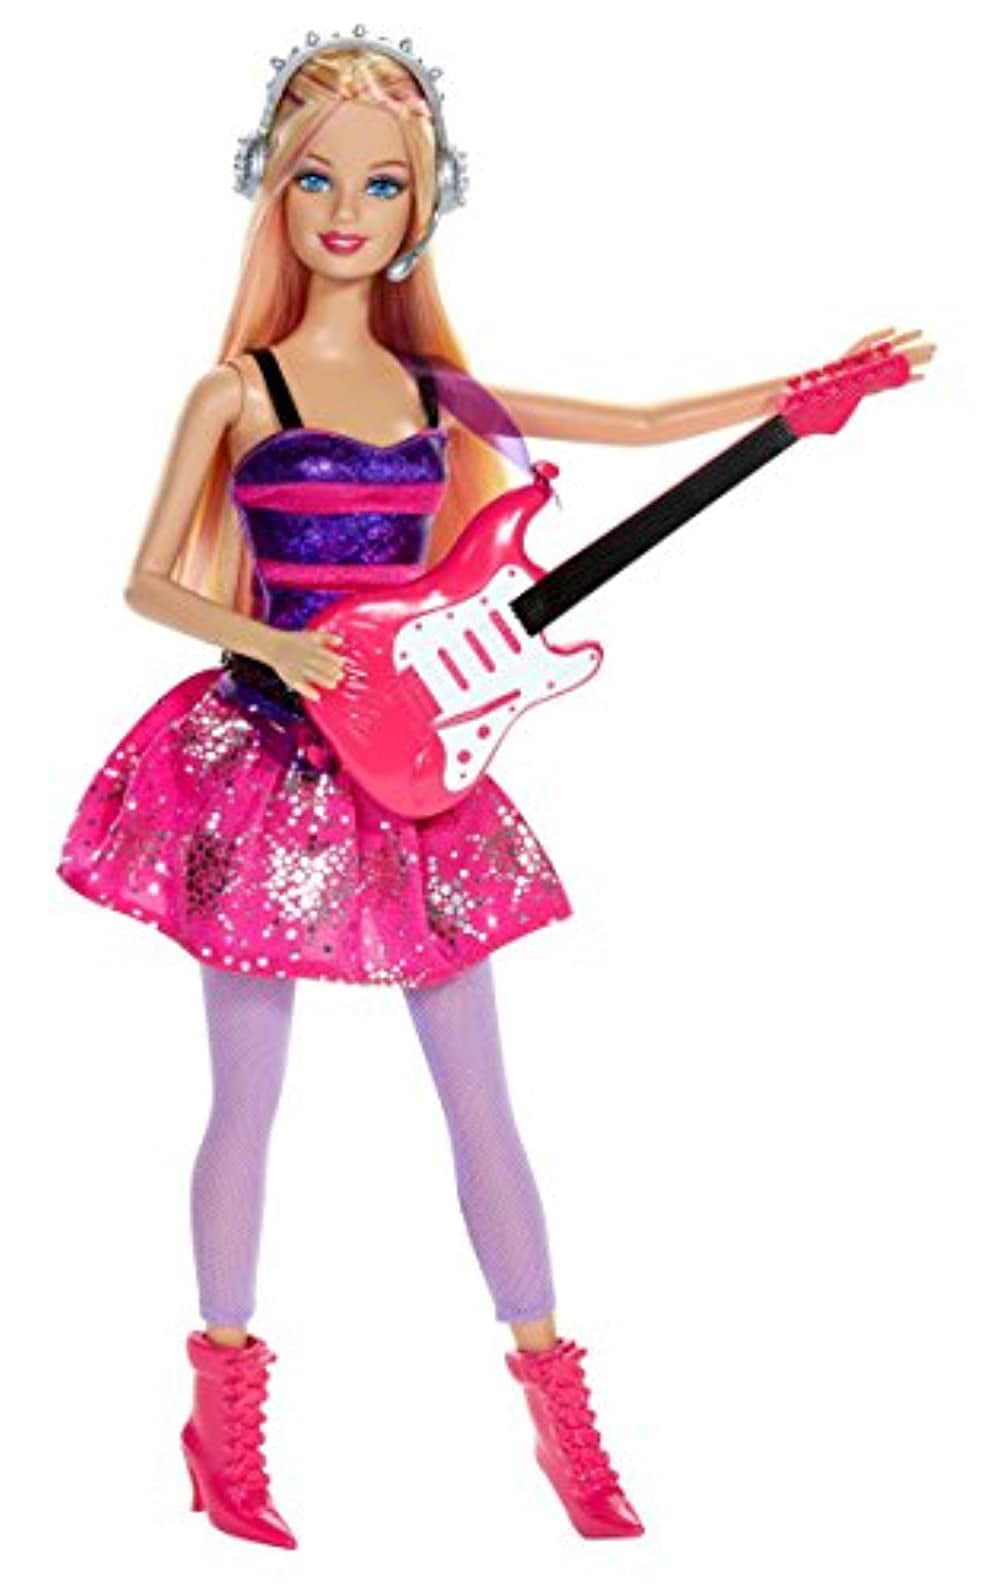 BARBIE YOU CAN BE ANYTHING ROCKSTAR DOLL PINK CAREER BARBIE DOLL NEW! 